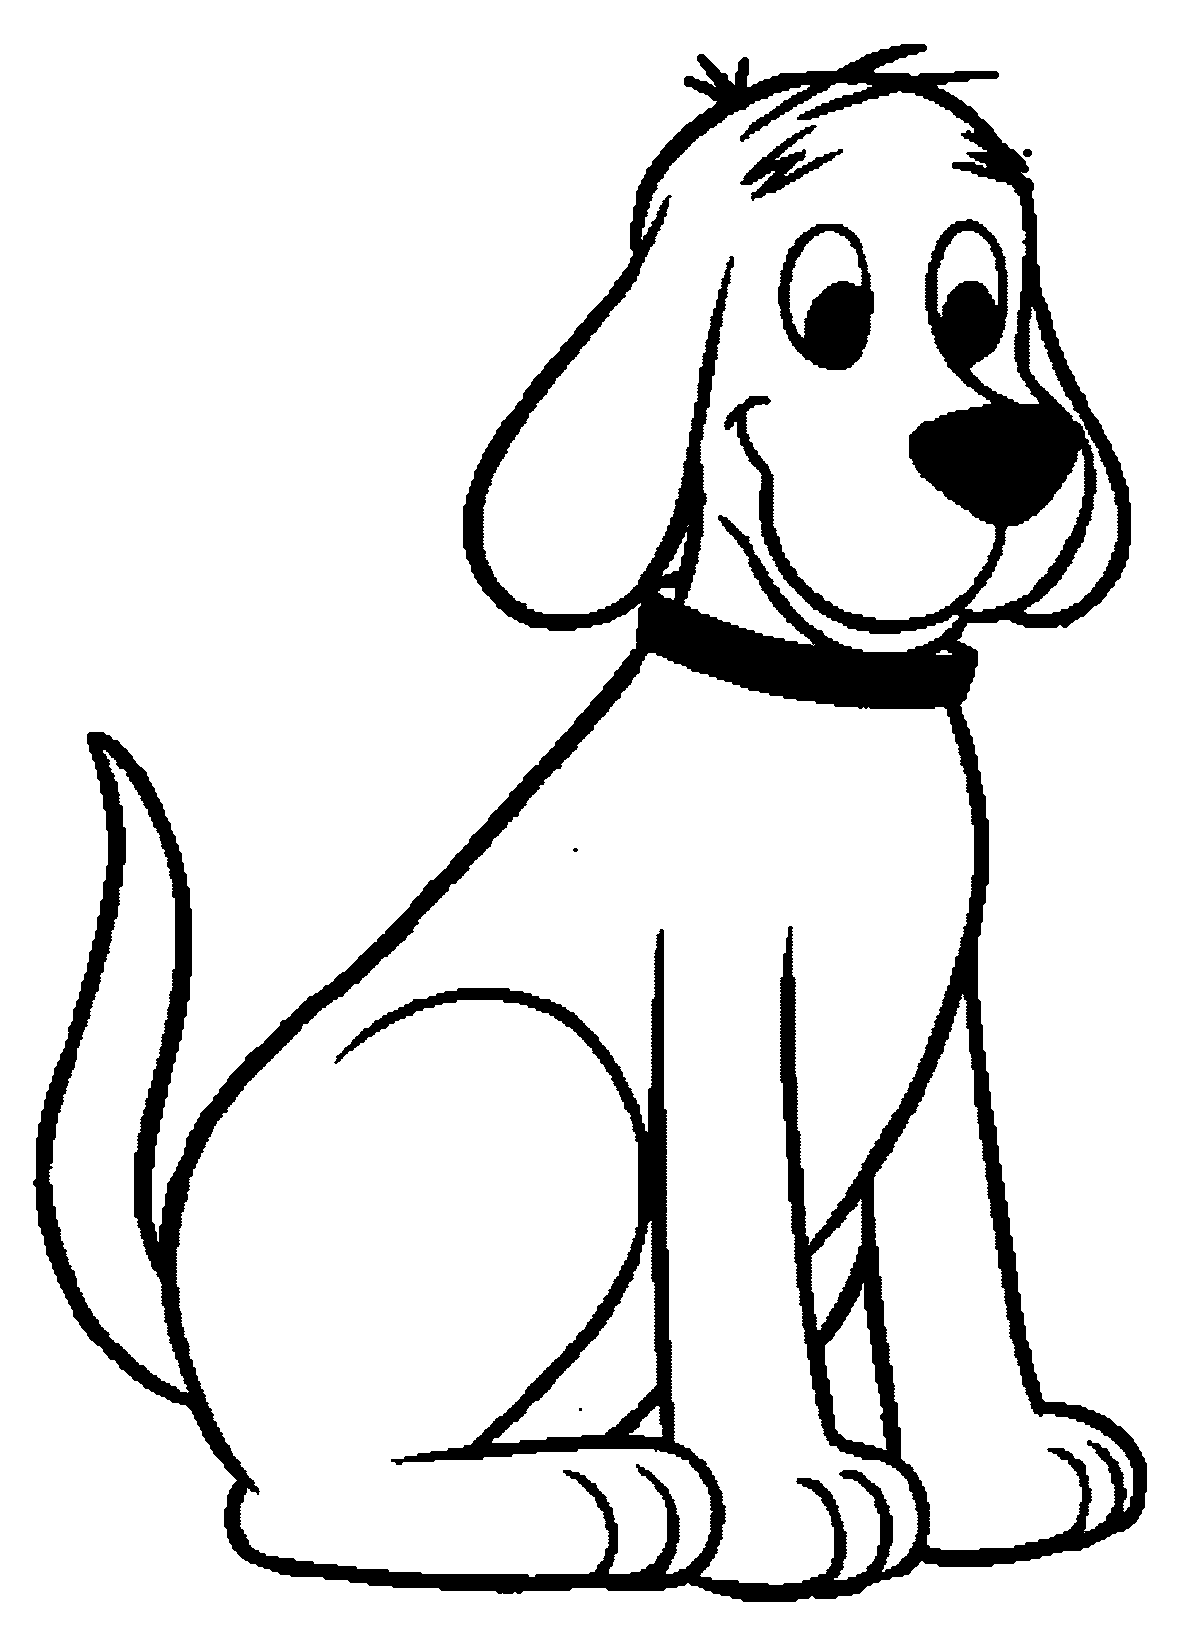 Clifford Coloring Pages - Best Coloring Pages For Kids